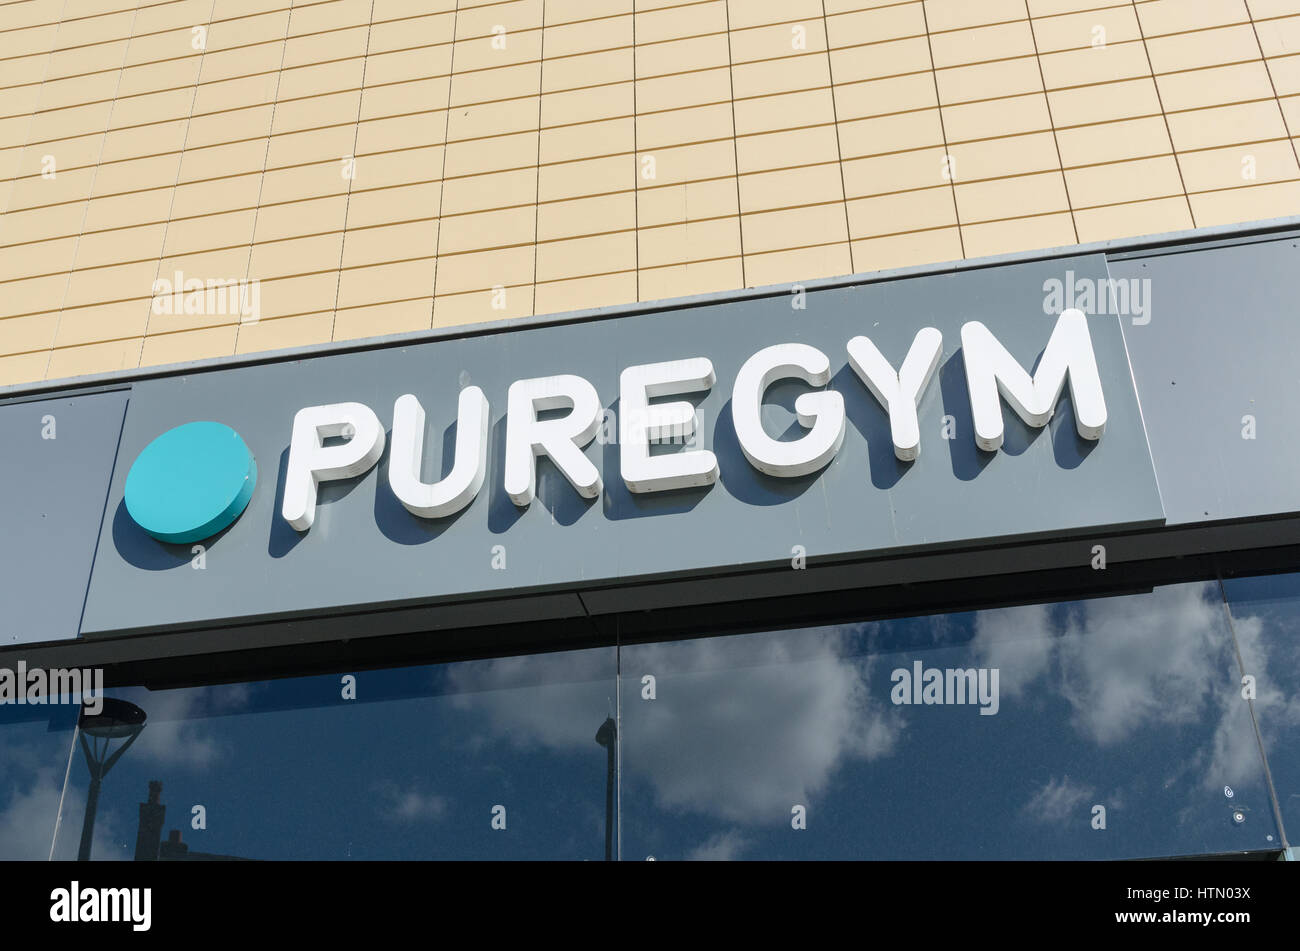 Puregym sign at one of its gyms Stock Photo